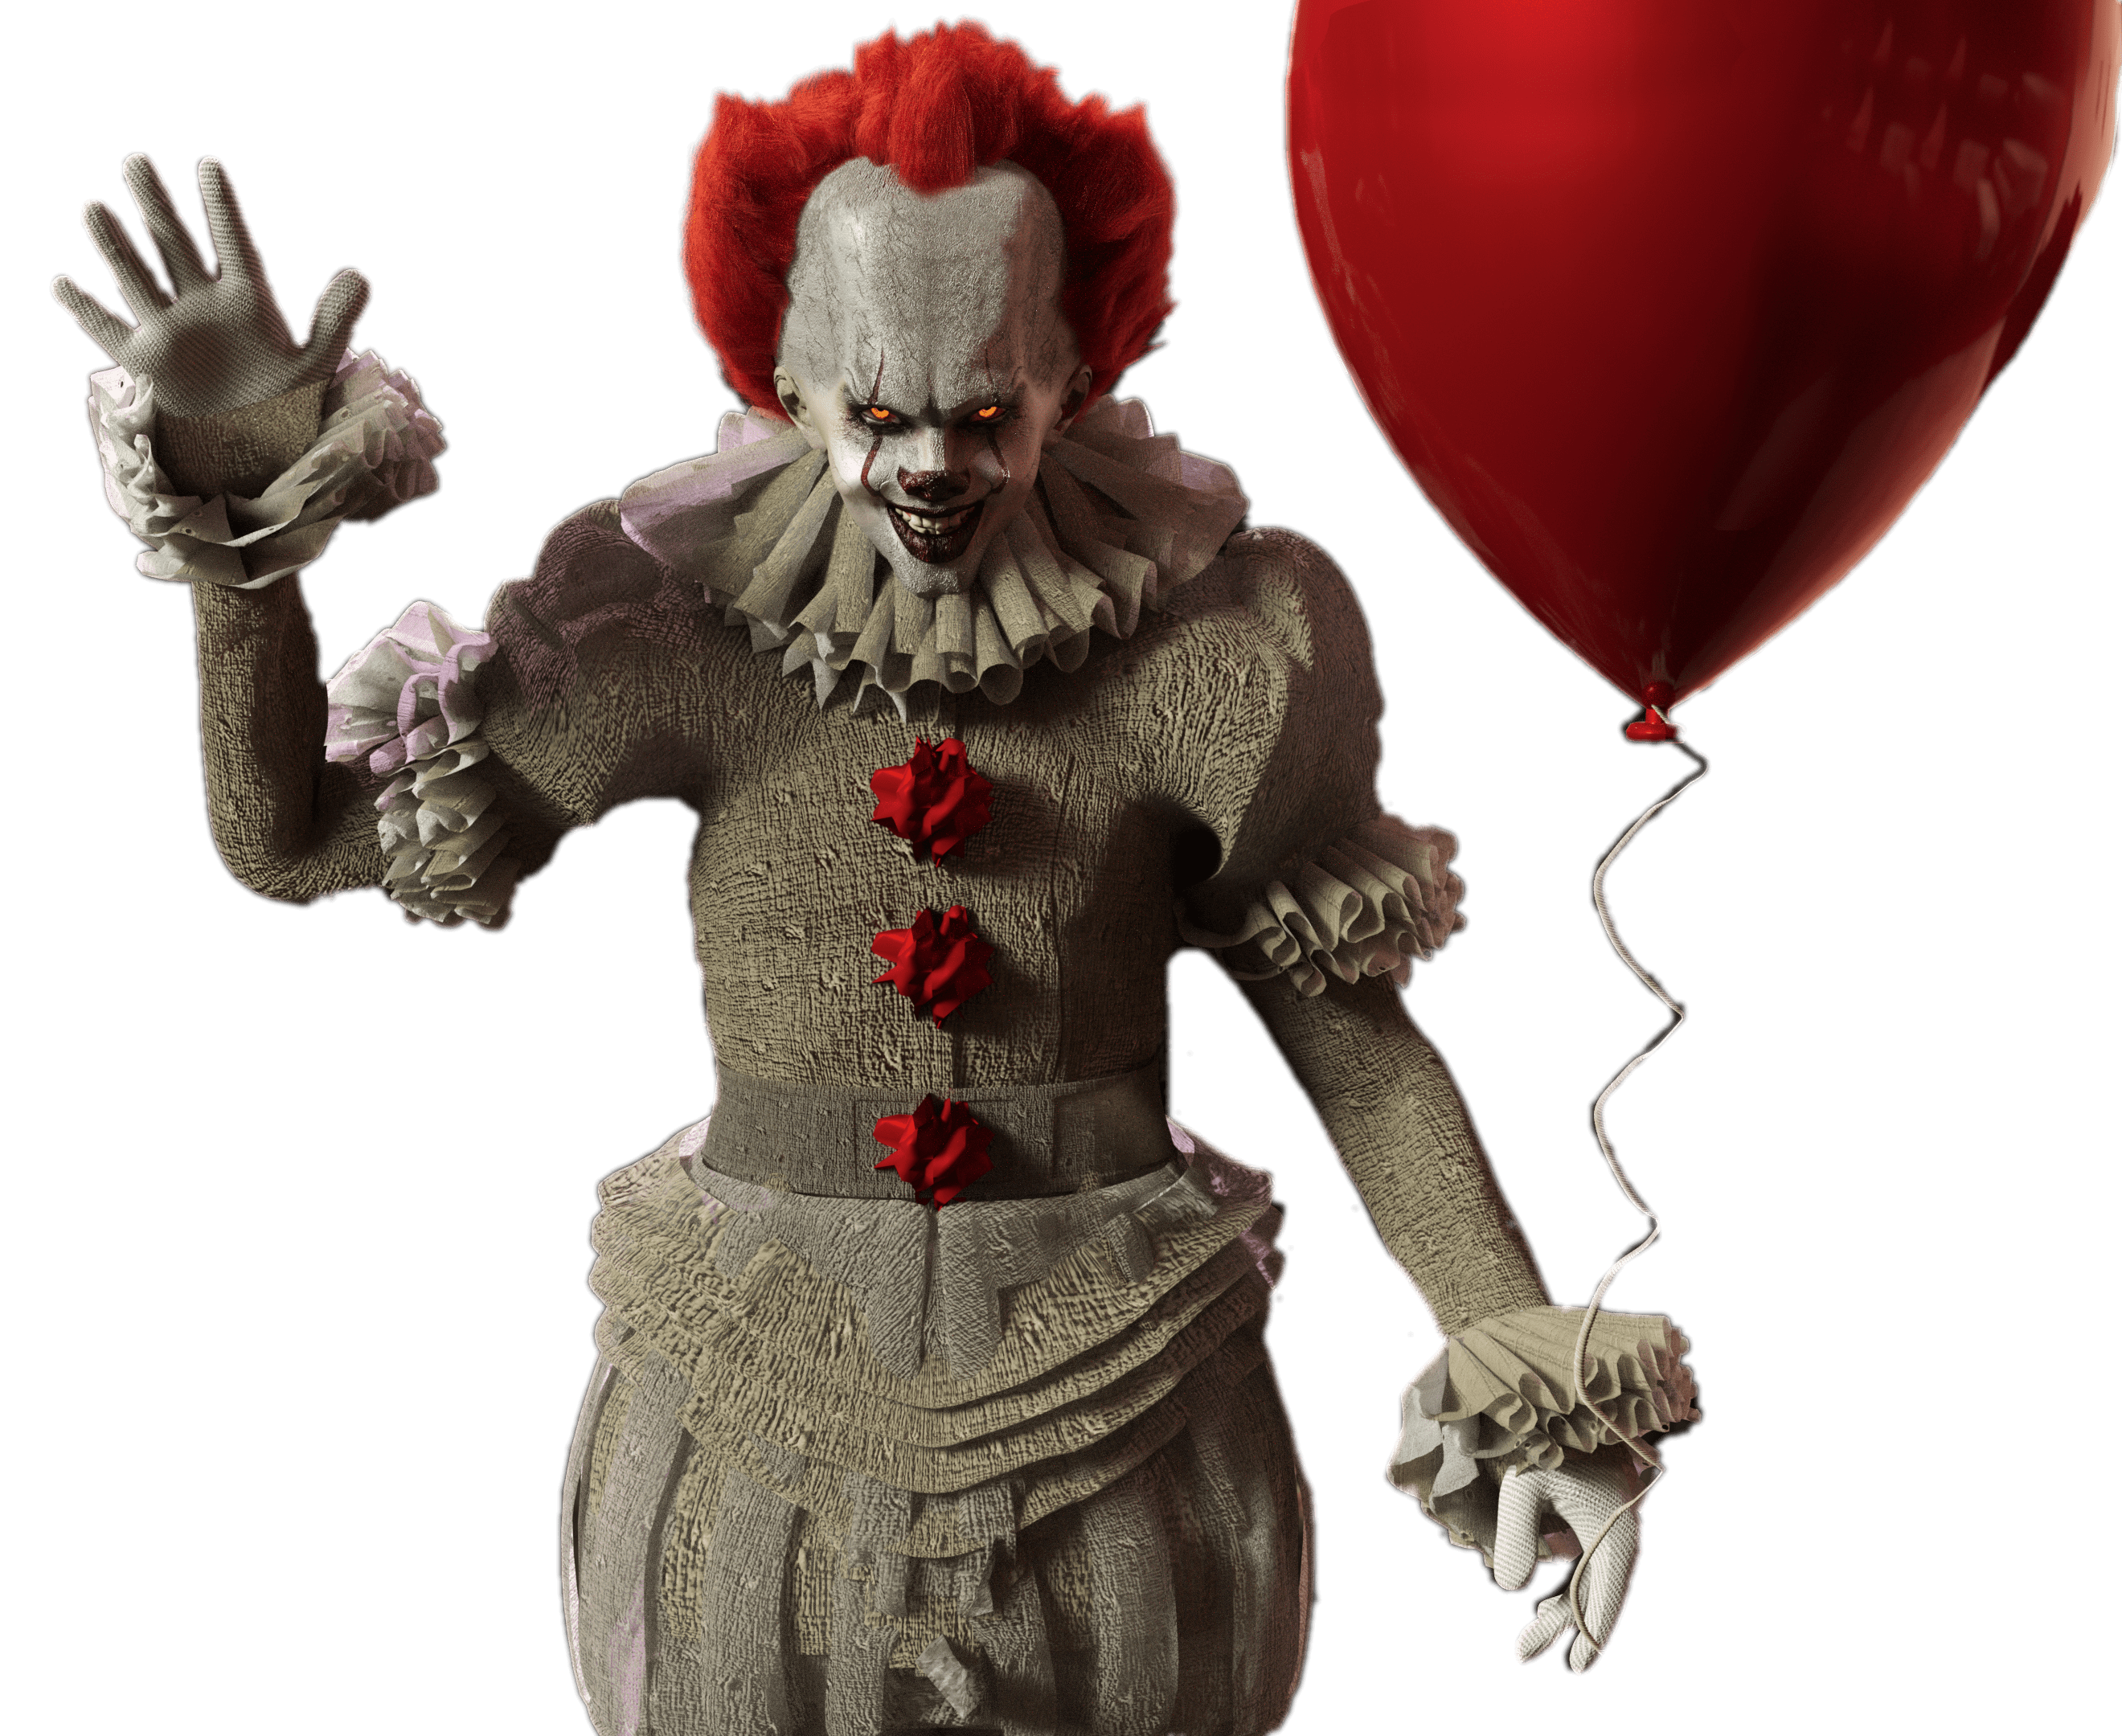 balloon clipart pennywise